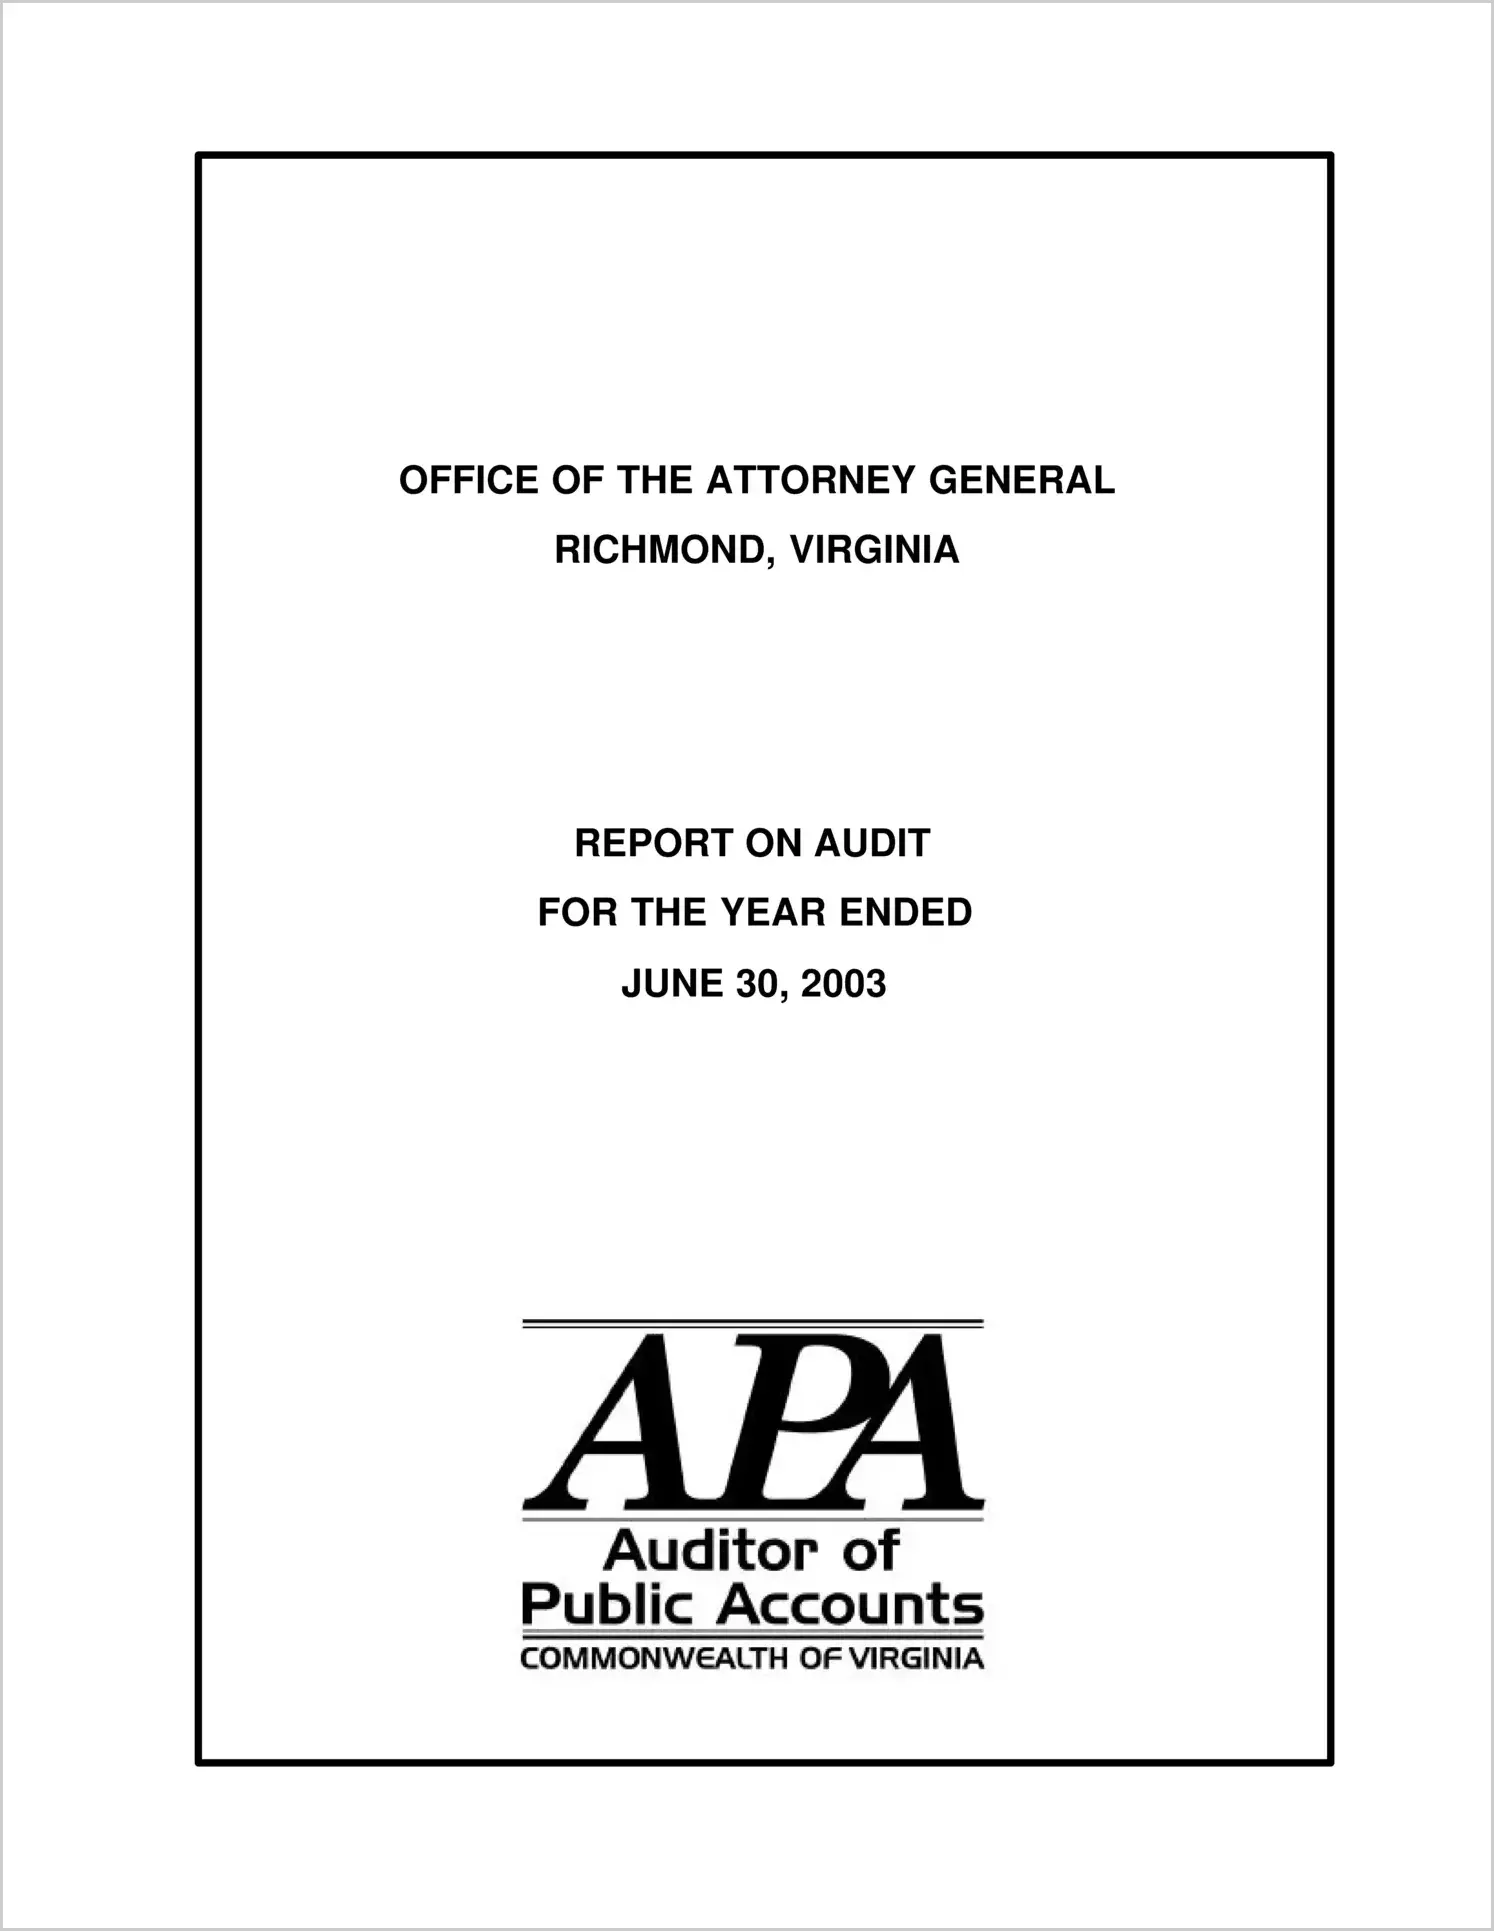 Office of the Attorney General for the year ended June 30, 2003